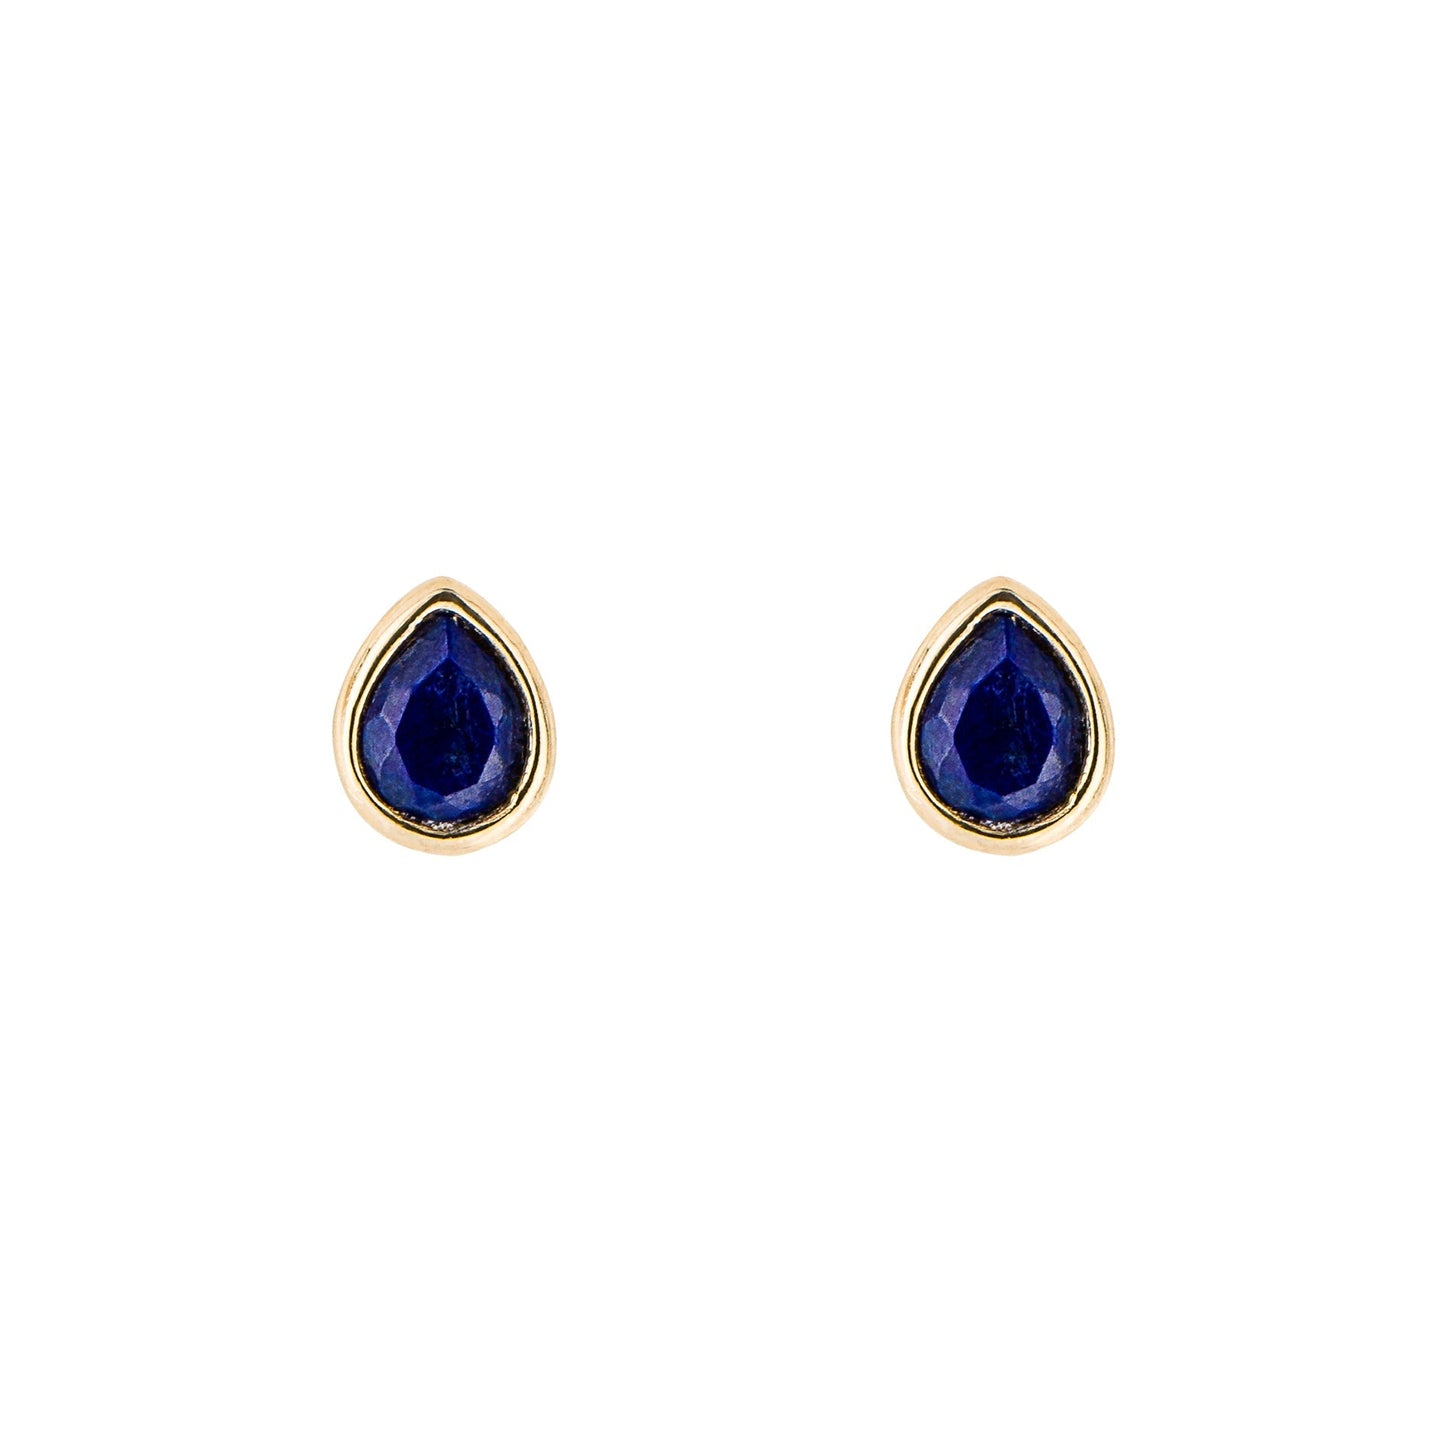 Lapis Lazuli pear shaped studs, gold plated on silver. - Collected